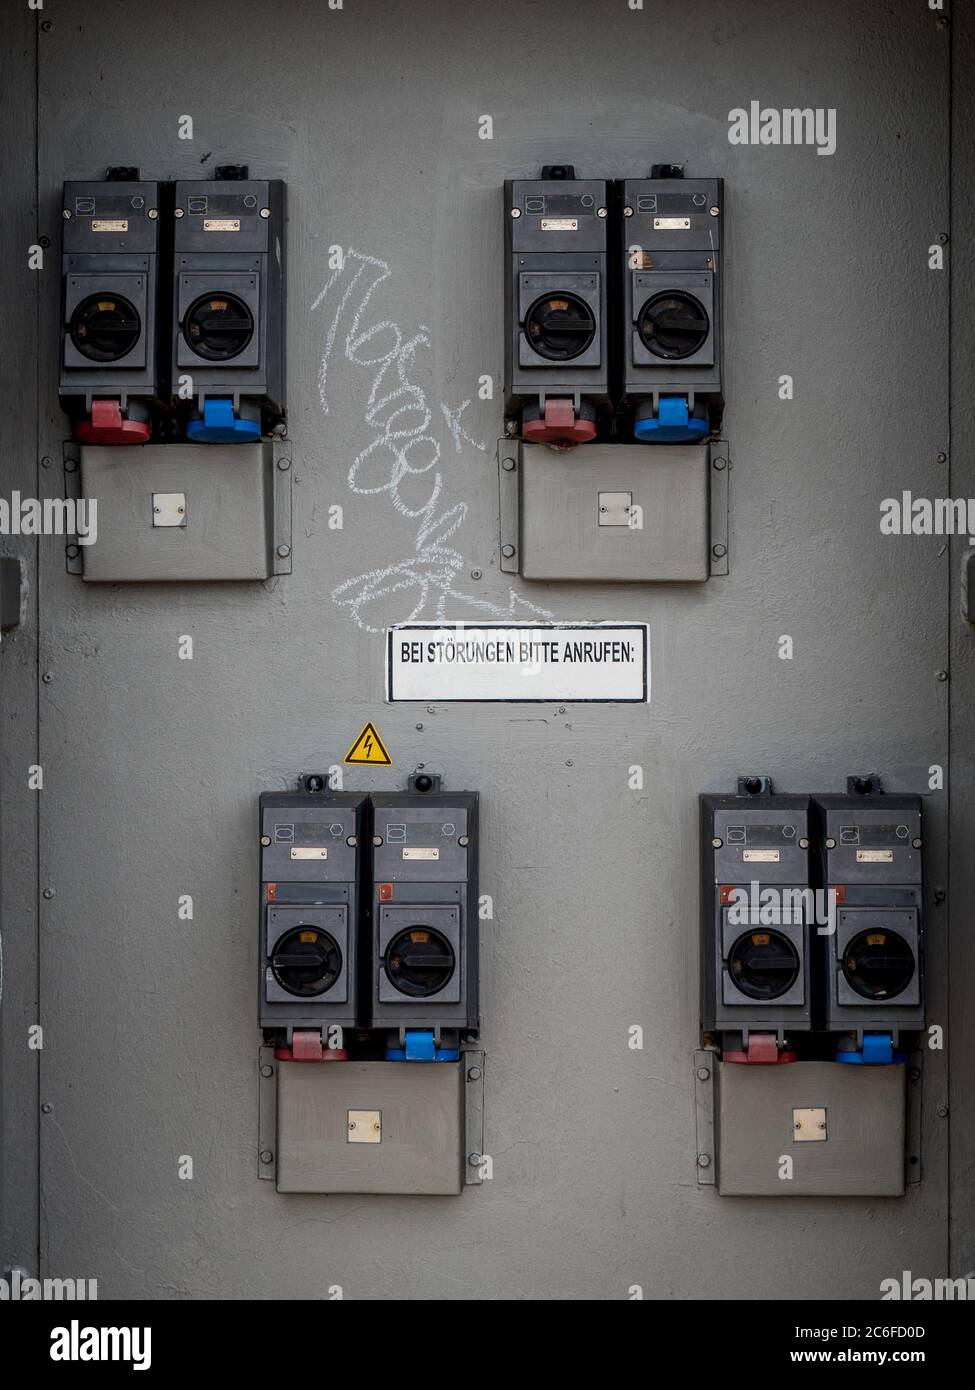 industrial high voltage switches with information sign, please call if there is a malfunction. bei stoerungen bitte anrufen in german language Stock Photo